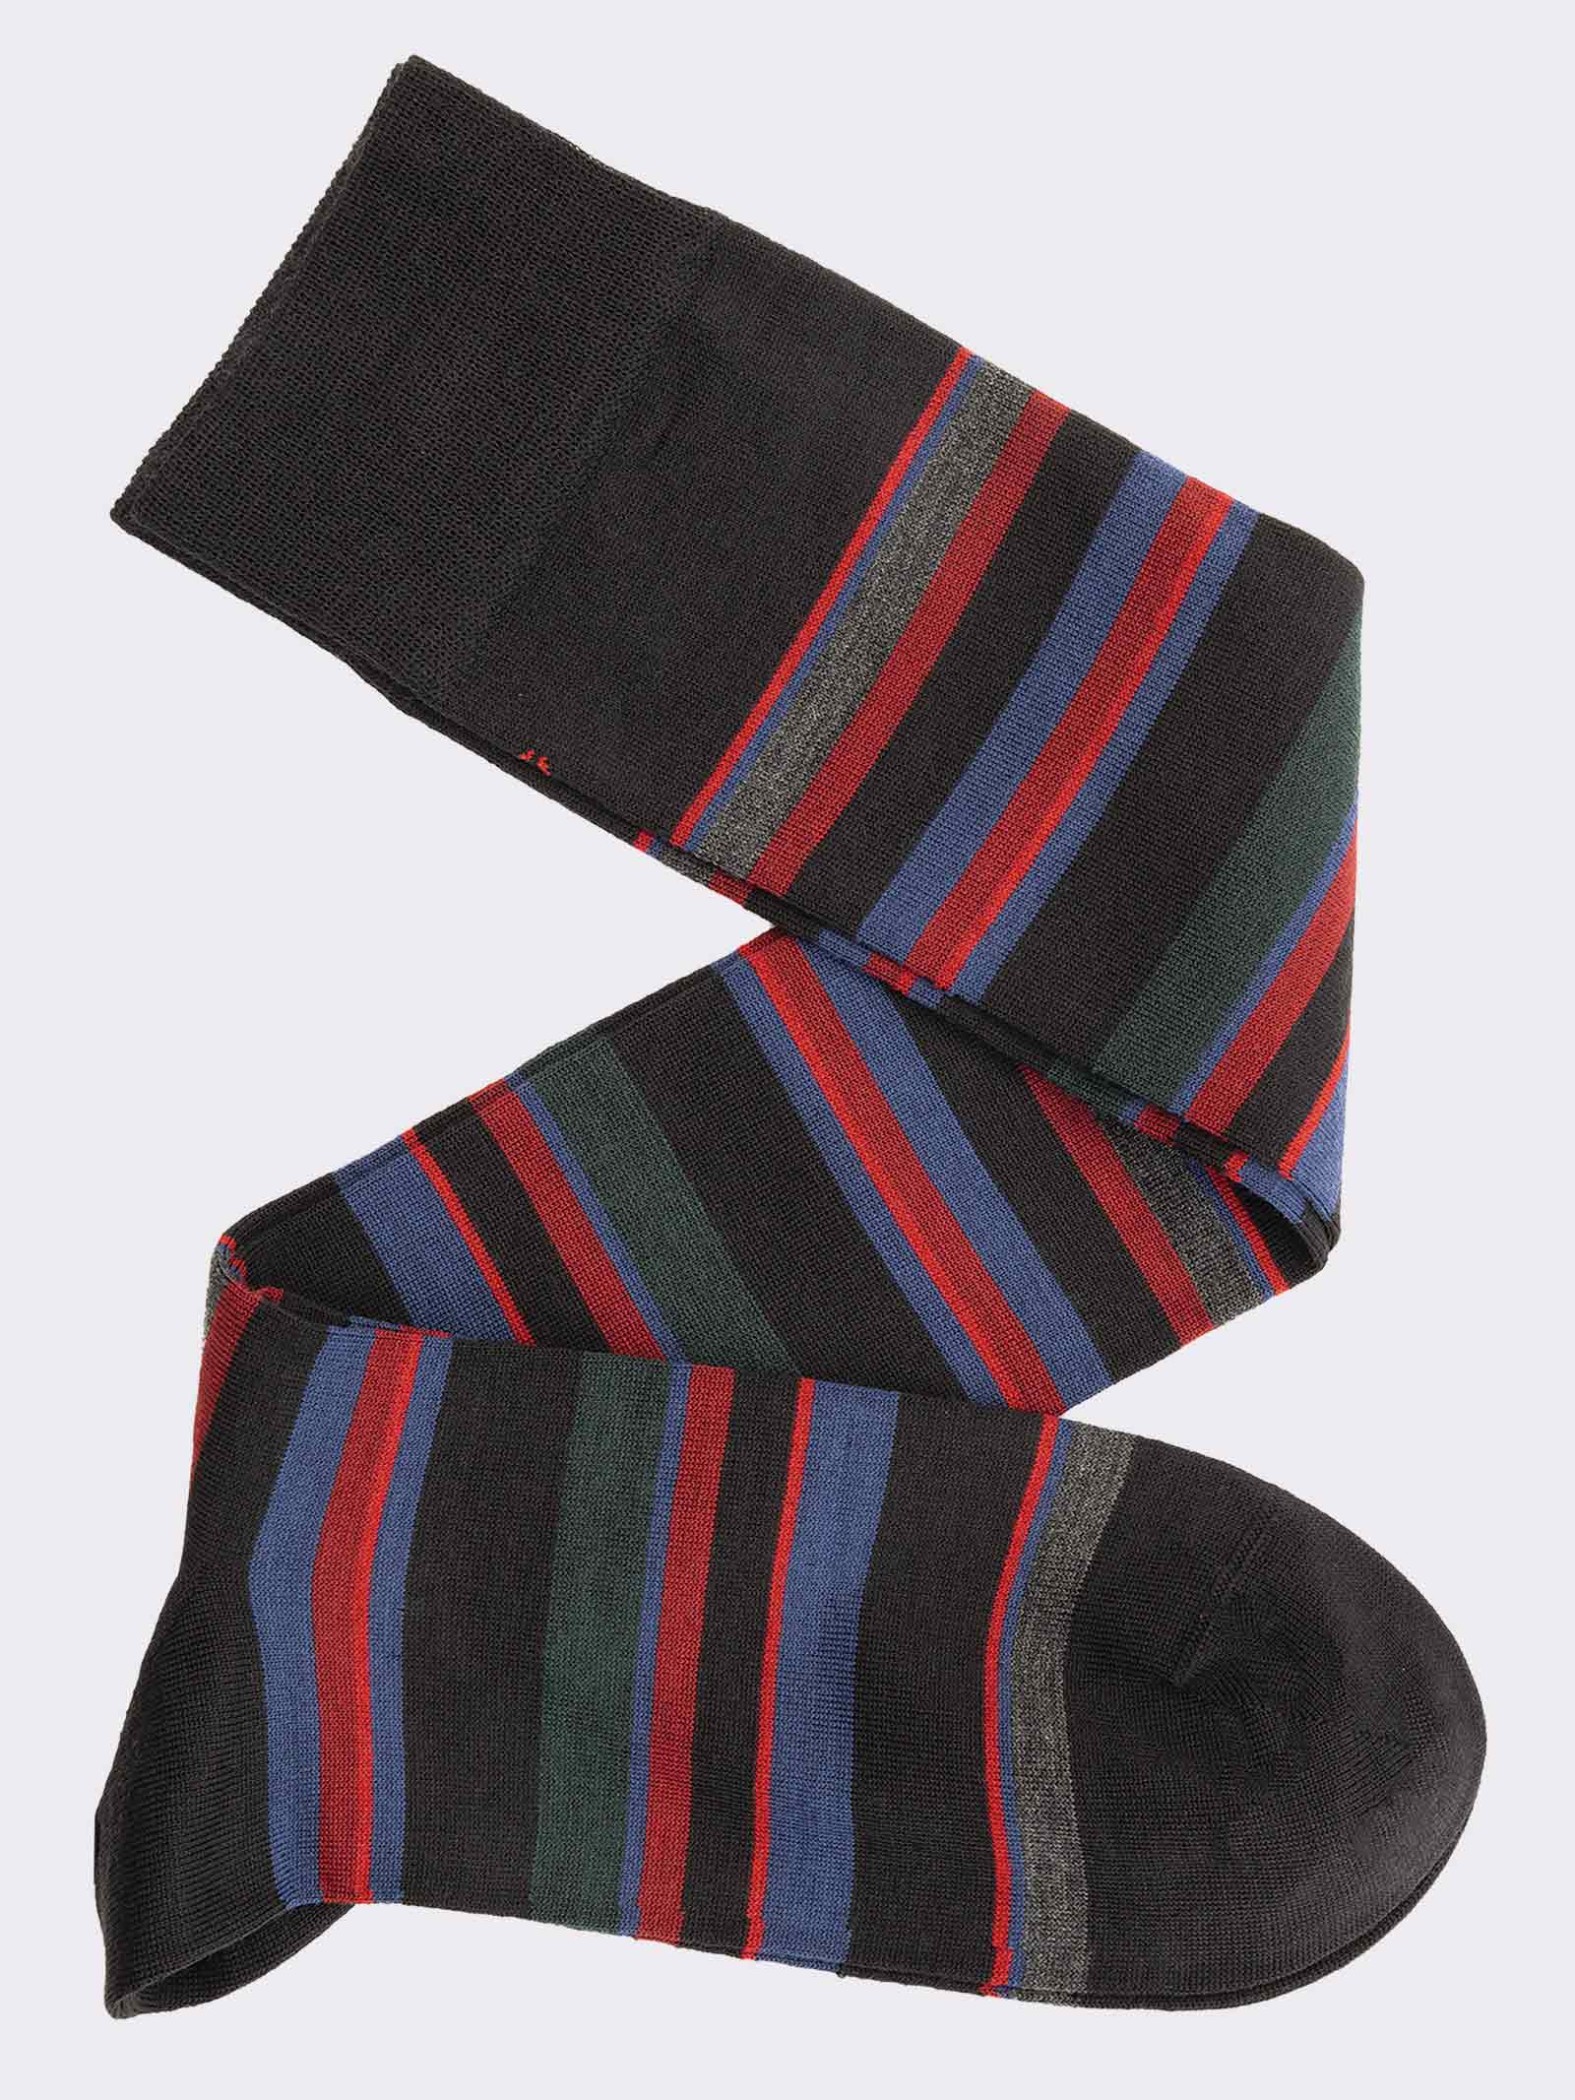 Men's knee high socks with stripes and bands in warm cotton